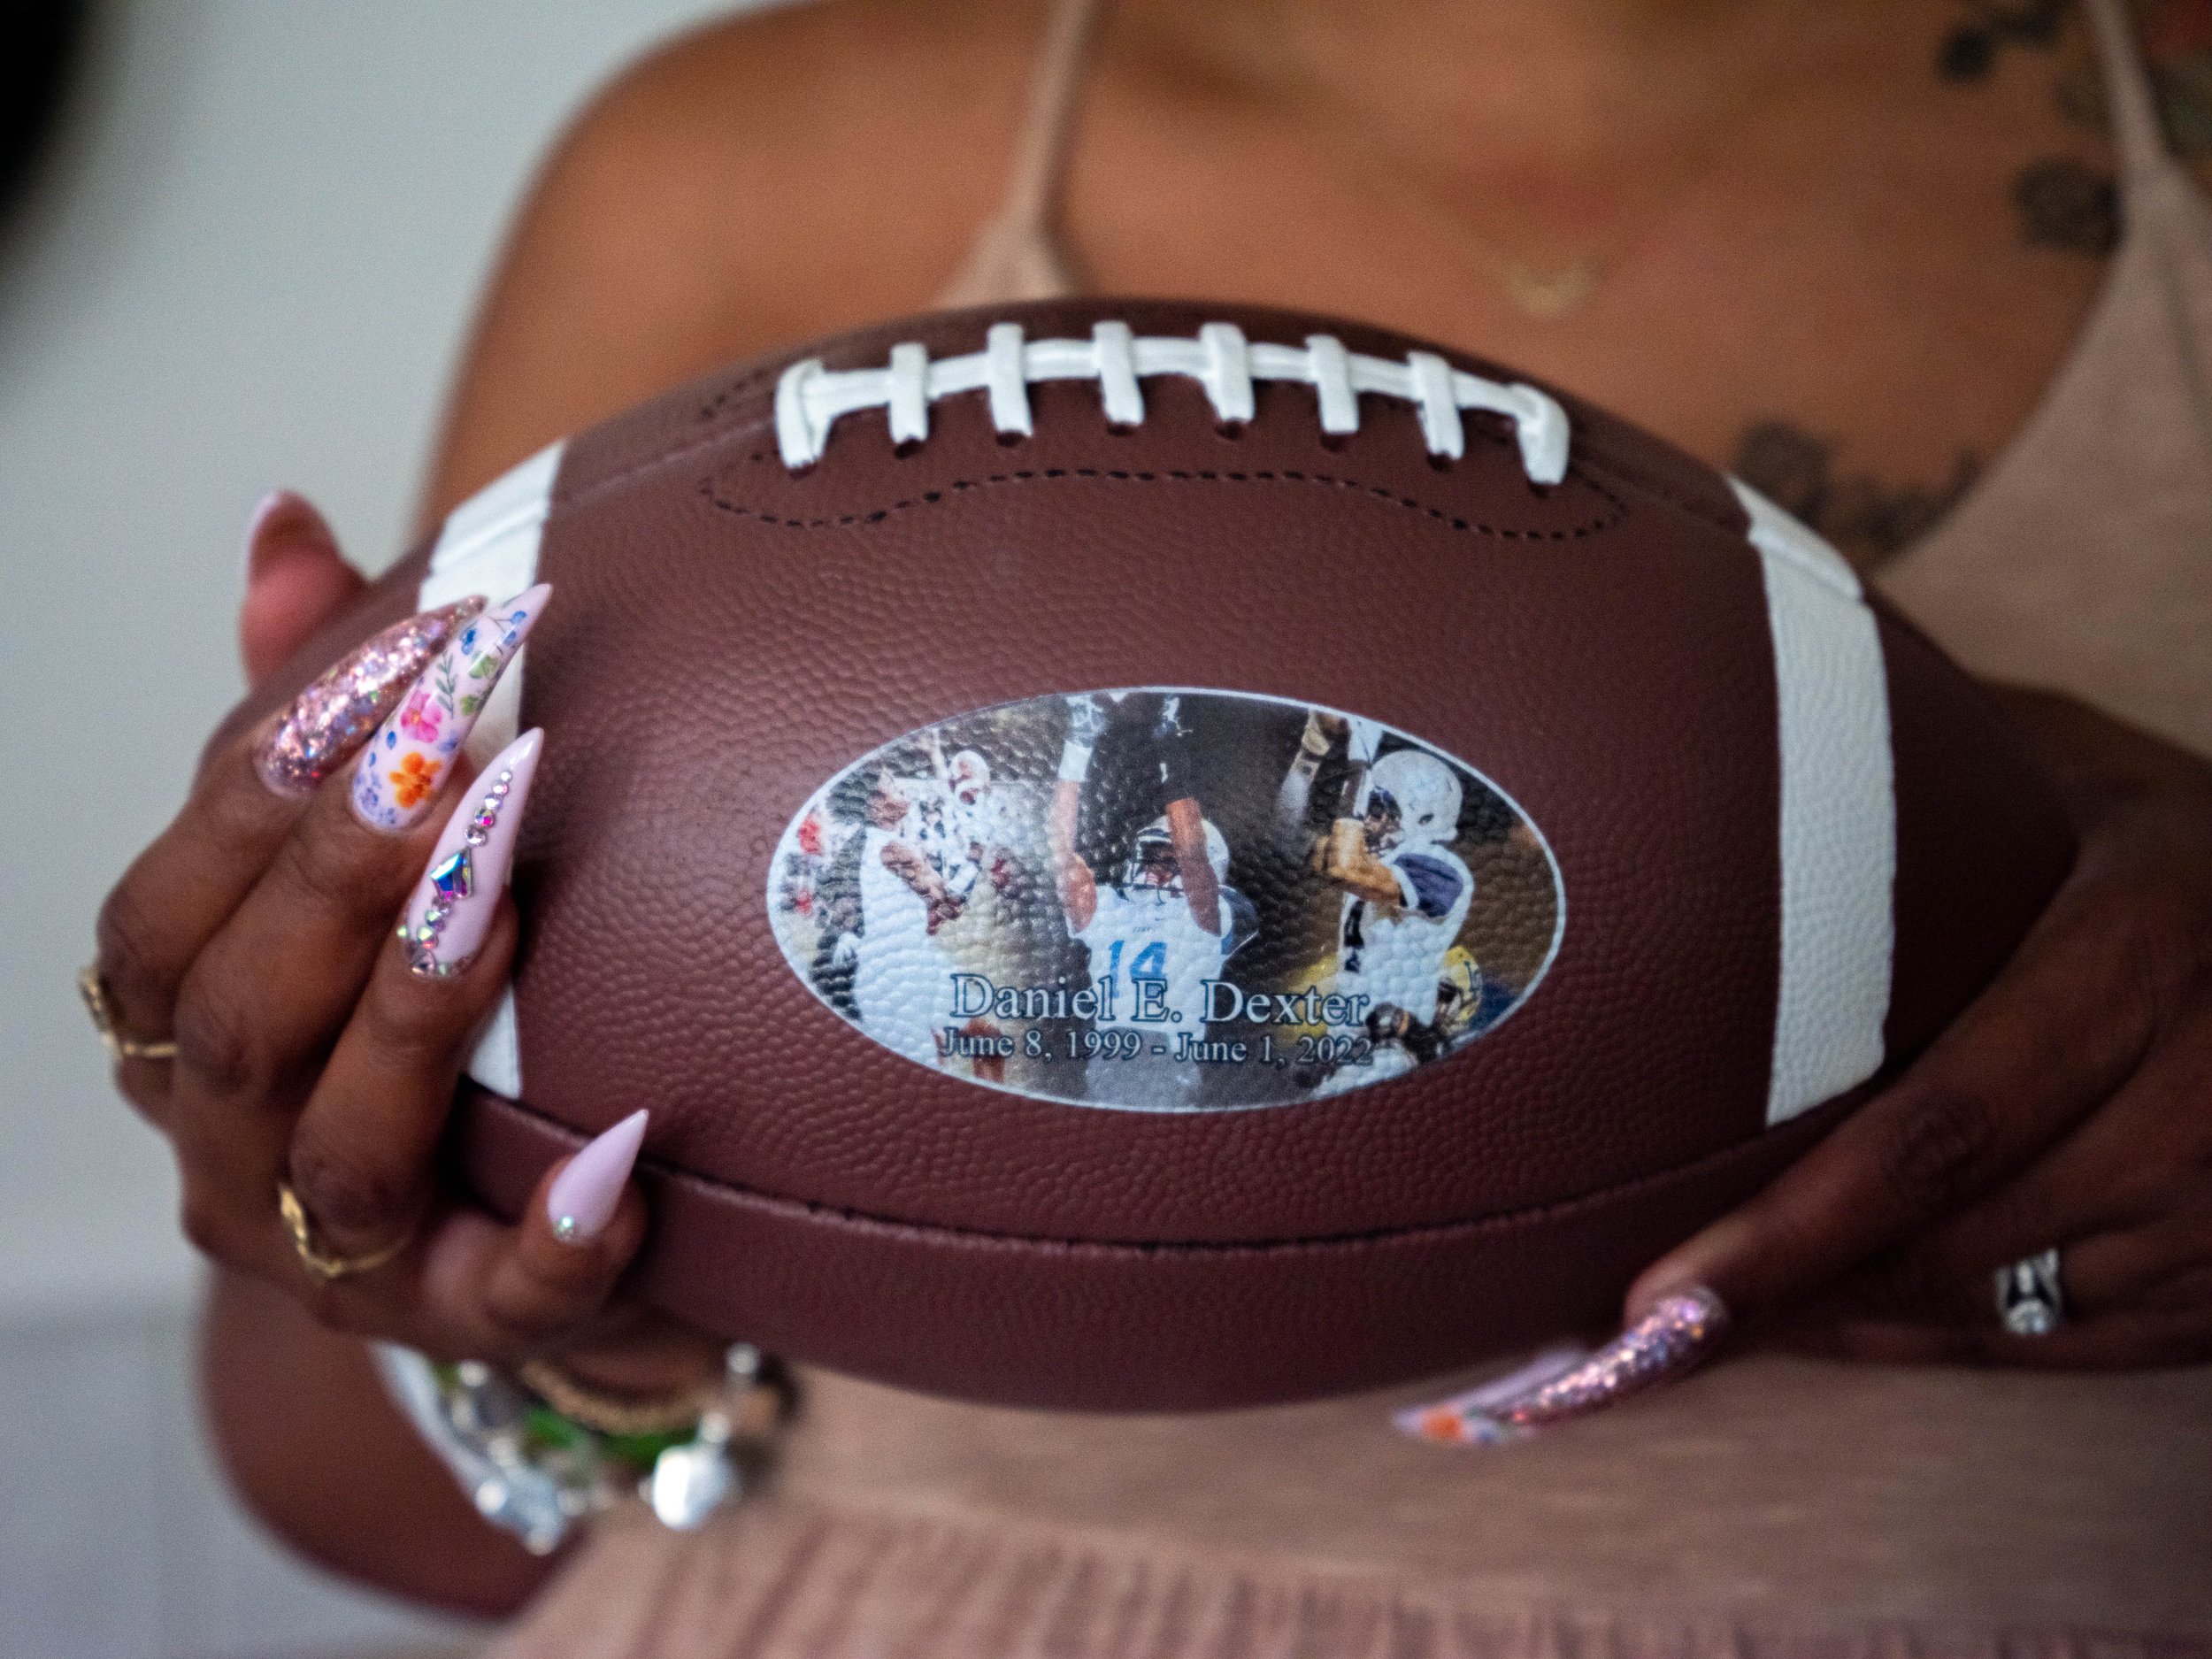  Daniel’s mother, Lauren Taylor-Mayweather, holds a football-shaped urn containing Daniel’s ashes on July 29, 2022. Football was one of Daniel’s passions and he was an “outstanding” linebacker and teammate for Victorville’s Silverado High School. (Ar